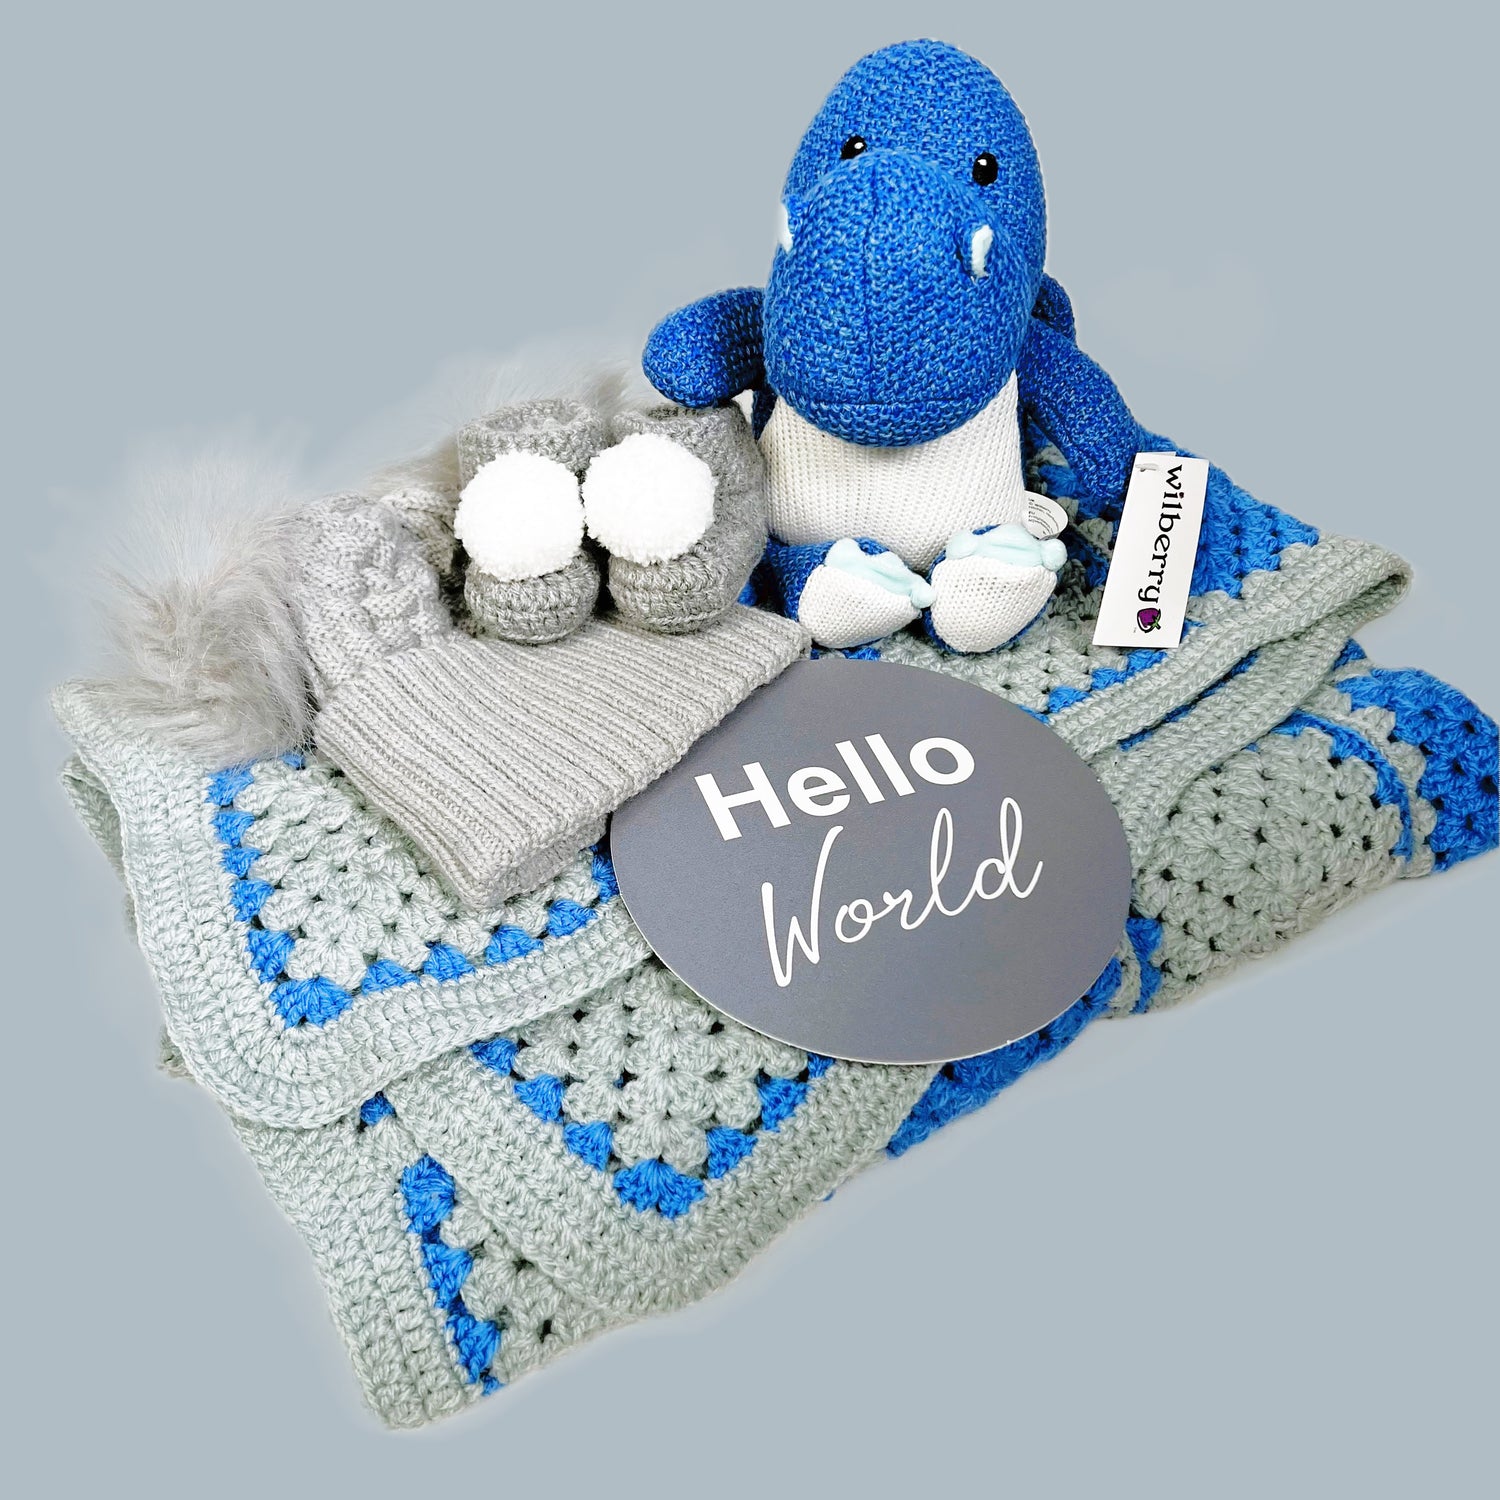 Grey and blue granny square baby boy crocheted baby blanket with a pair of grey baby booties with pompoms, a grey baby pompom hat, a "Hello World" baby photography plaque.